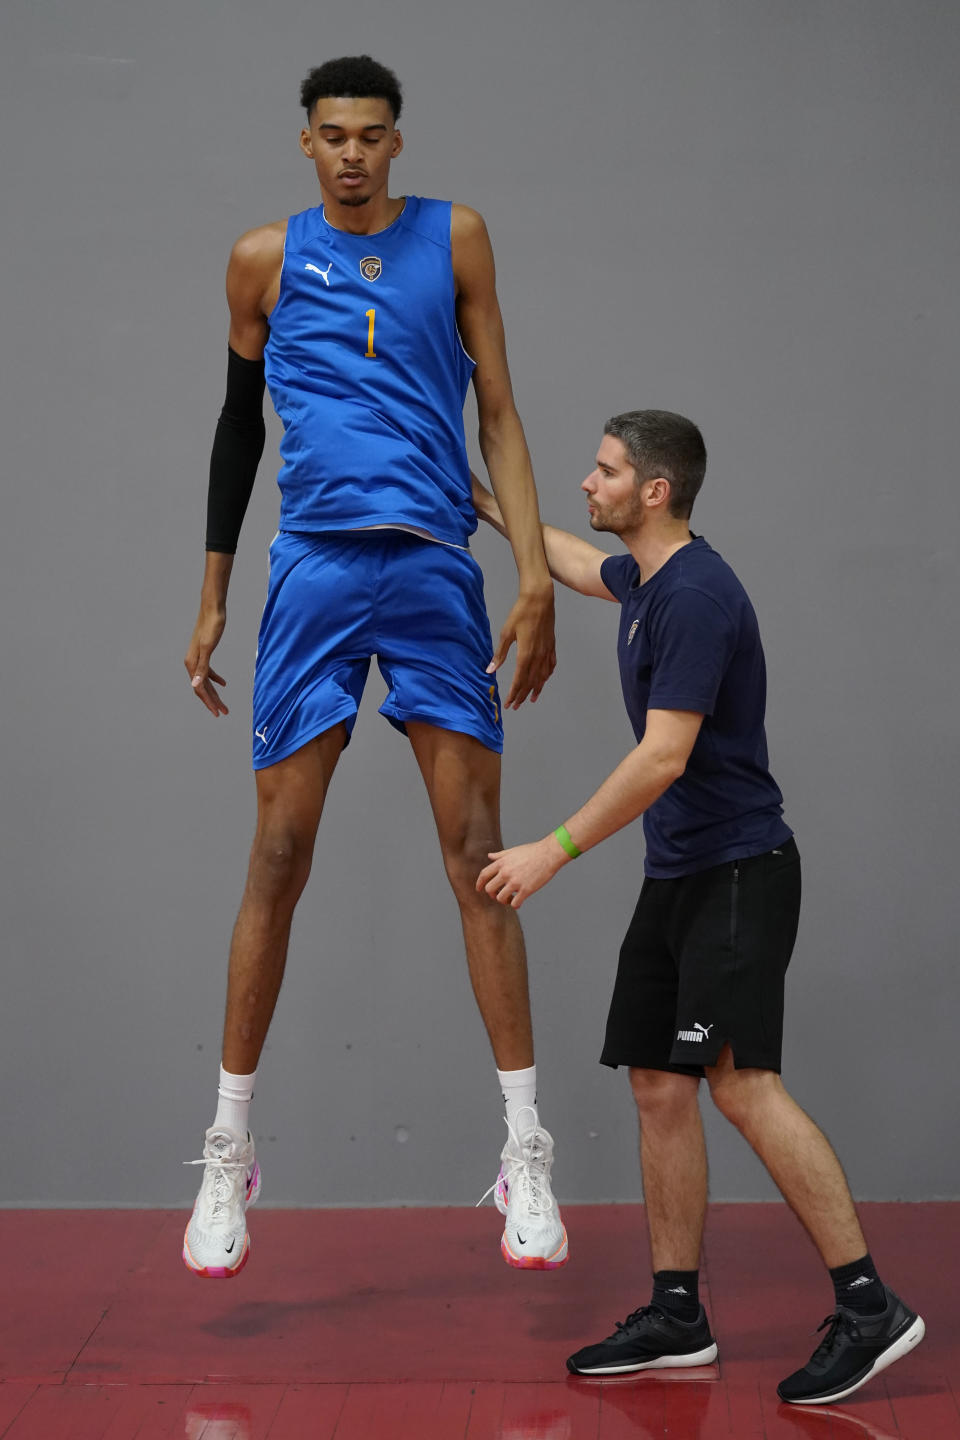 Boulogne-Levallois Metropolitans 92's Victor Wembanyama, left, works with a trainer during a team practice Monday, Oct. 3, 2022, in Las Vegas. (AP Photo/Abbie Parr)